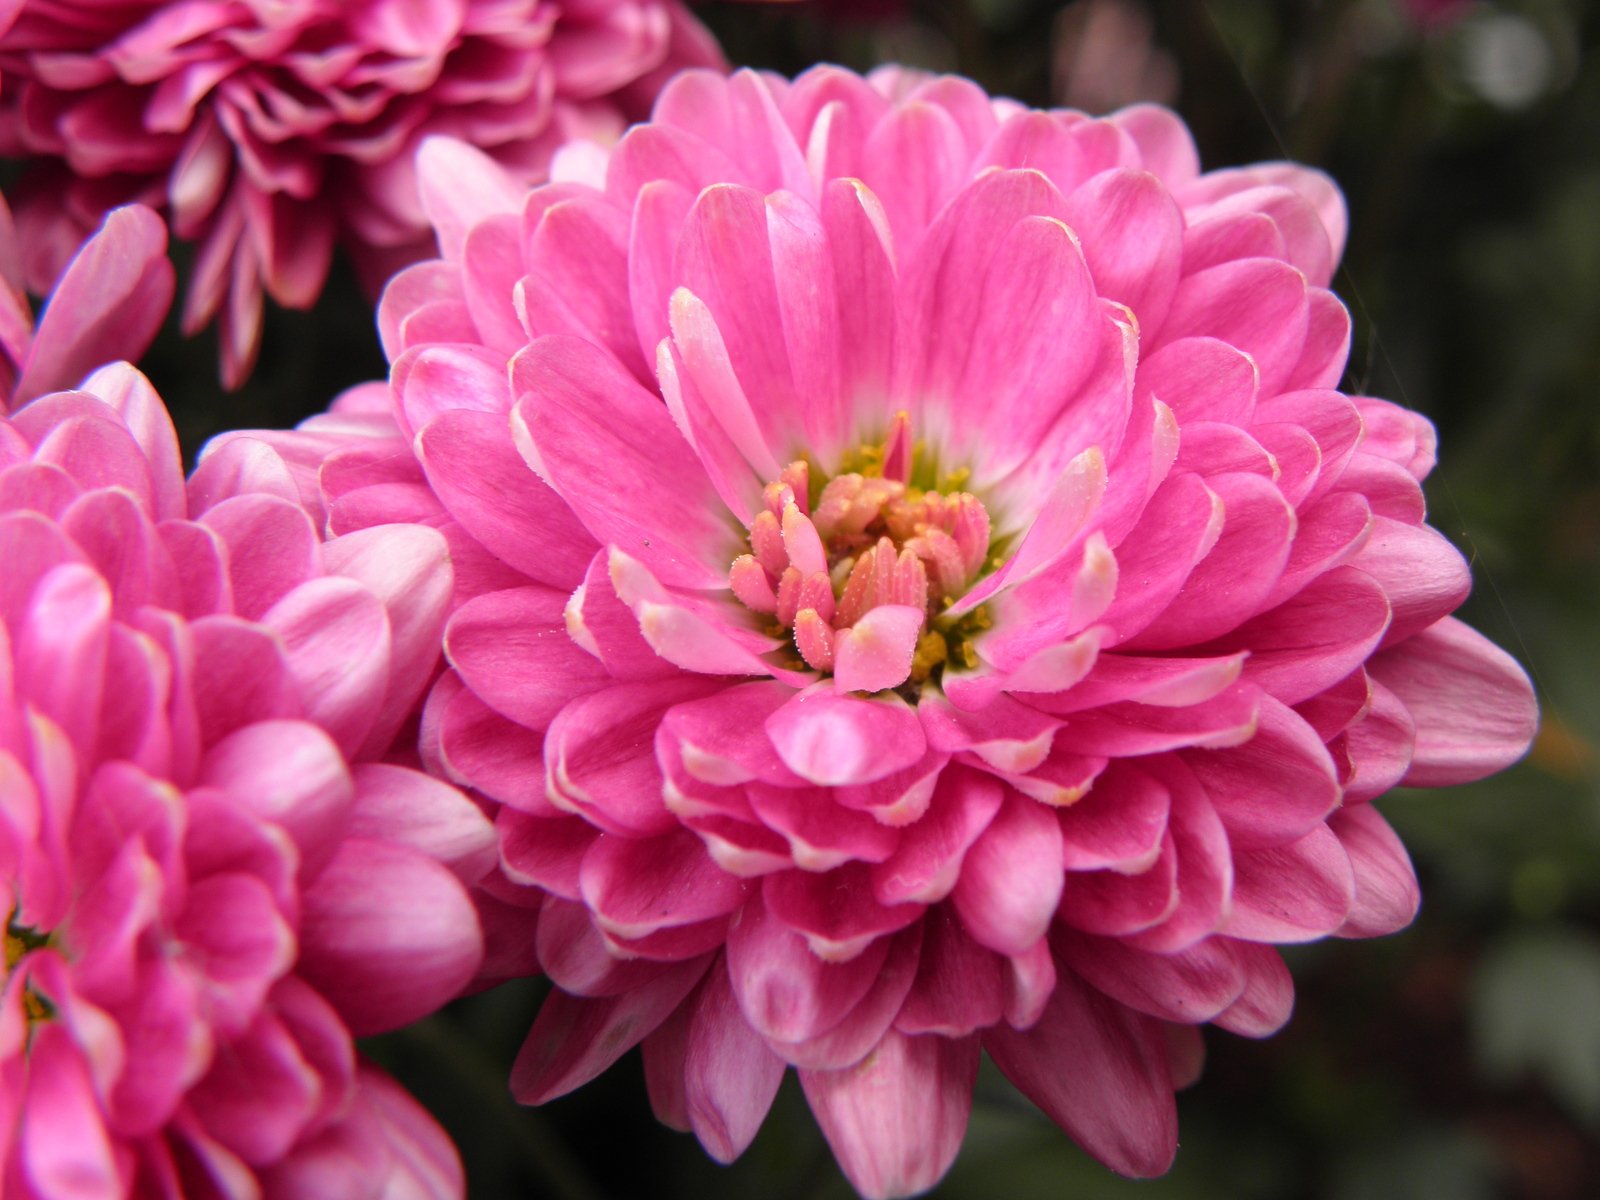 a pink flower is seen in this pograph